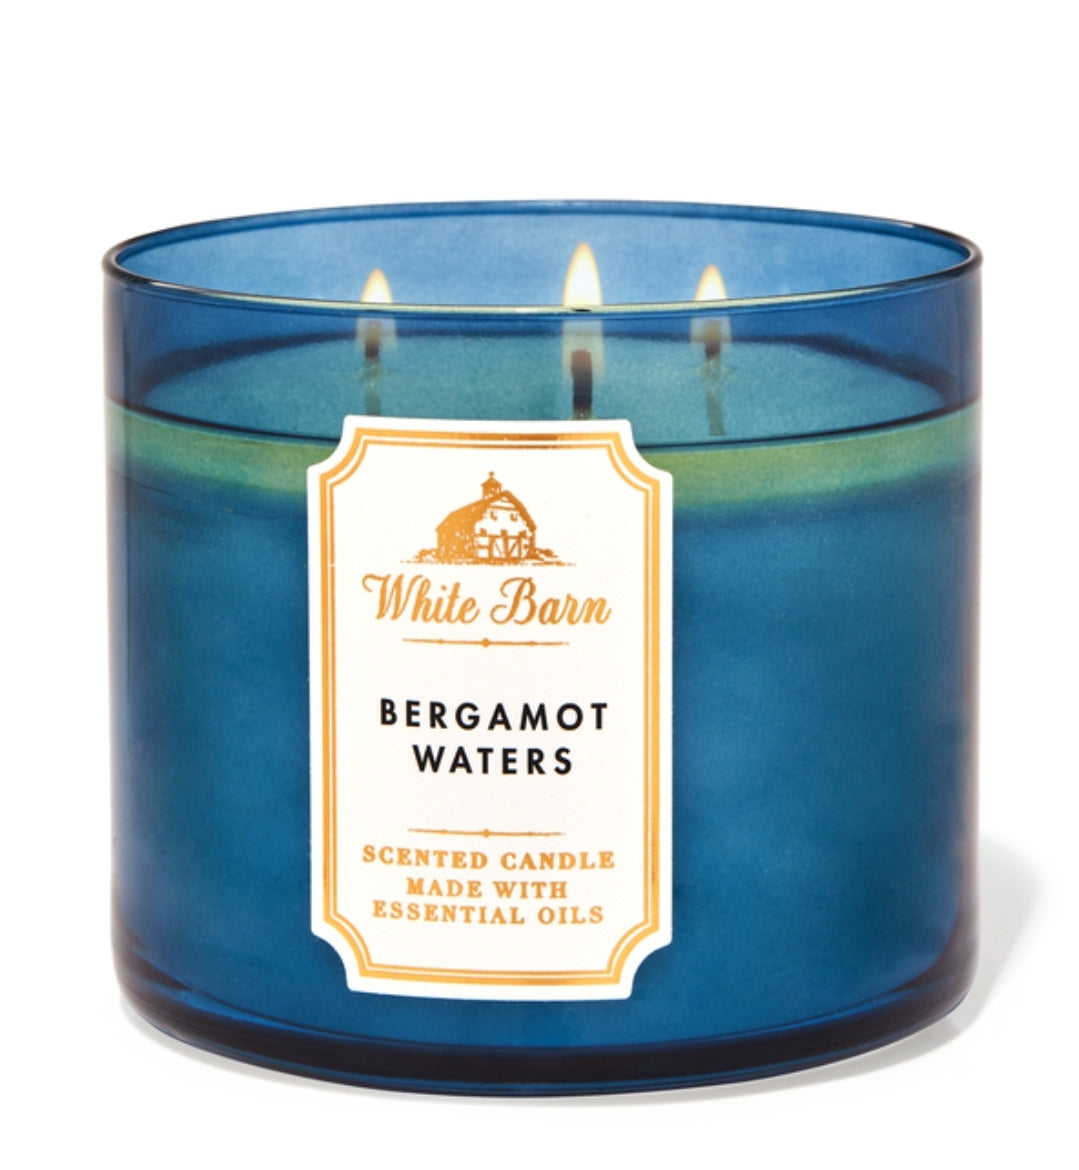 Bergamot Waters Scented Candle